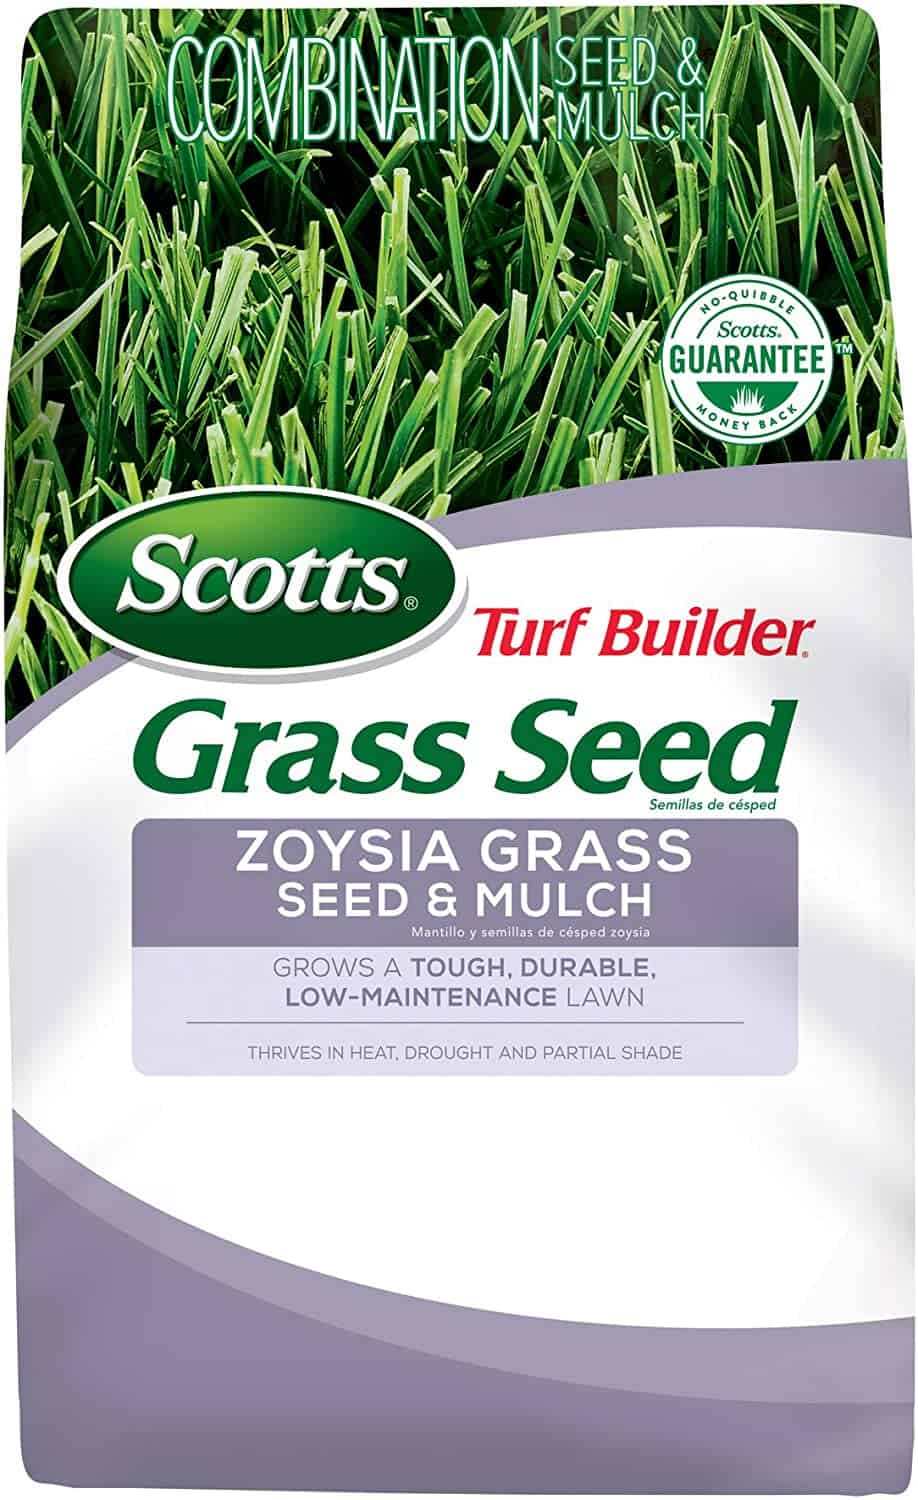 Scotts Turf Builder Grass Seed Zoysia Grass Seed and Mulch